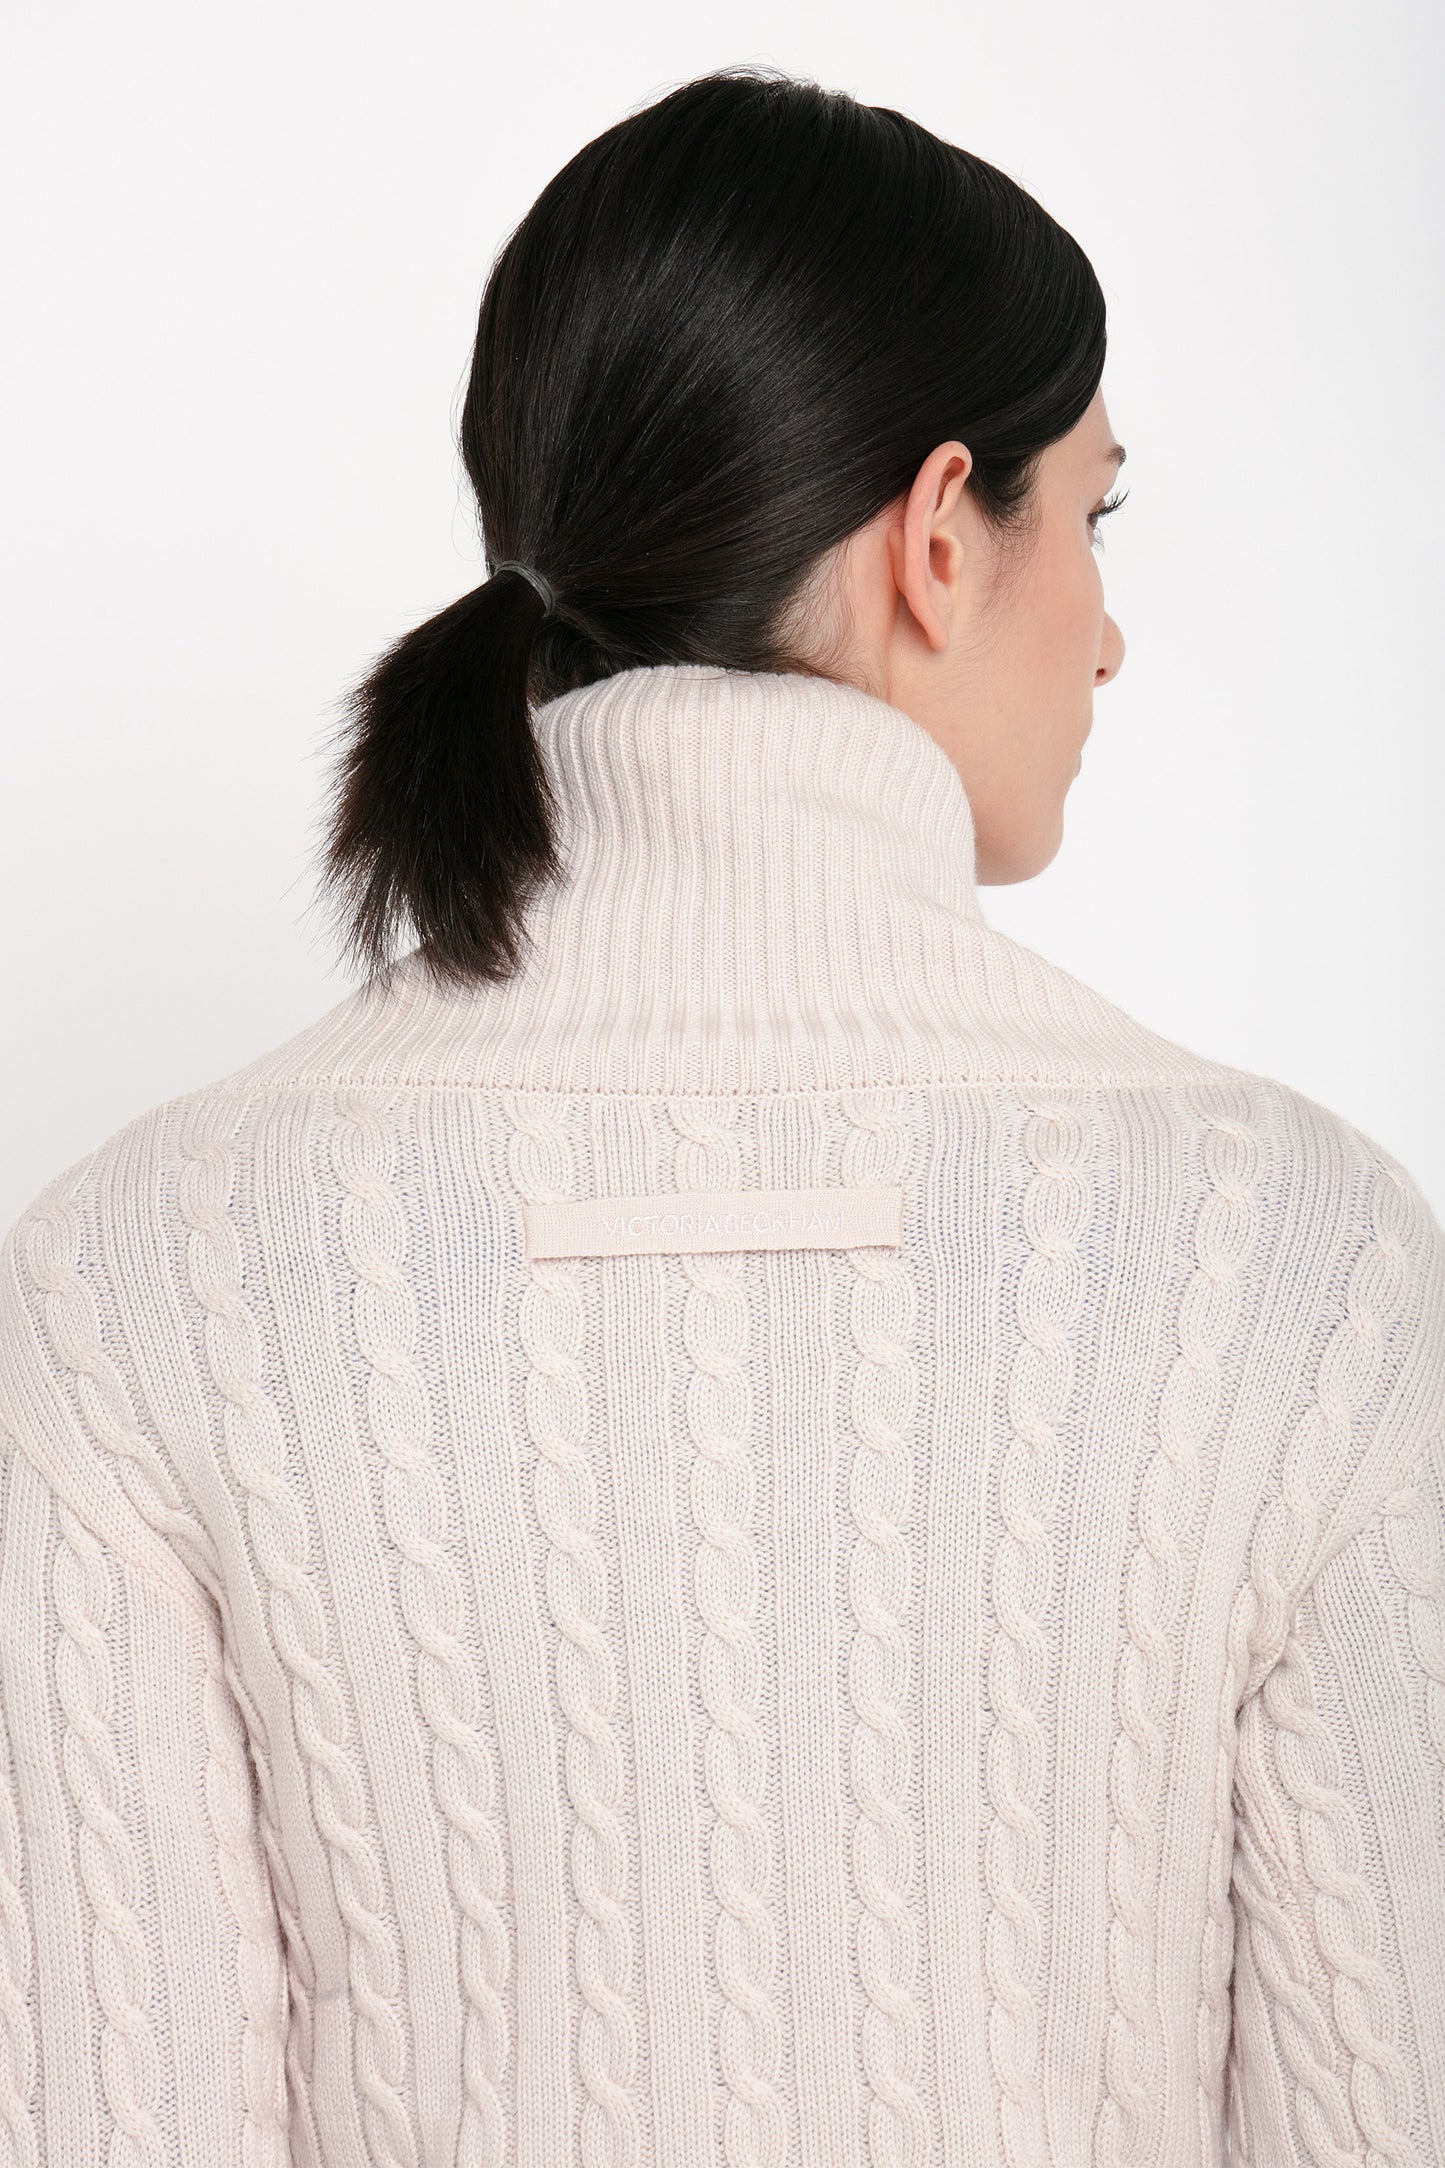 A person with dark hair in a low ponytail is seen from the back, wearing the Victoria Beckham Wrap Detail Jumper In Bone.